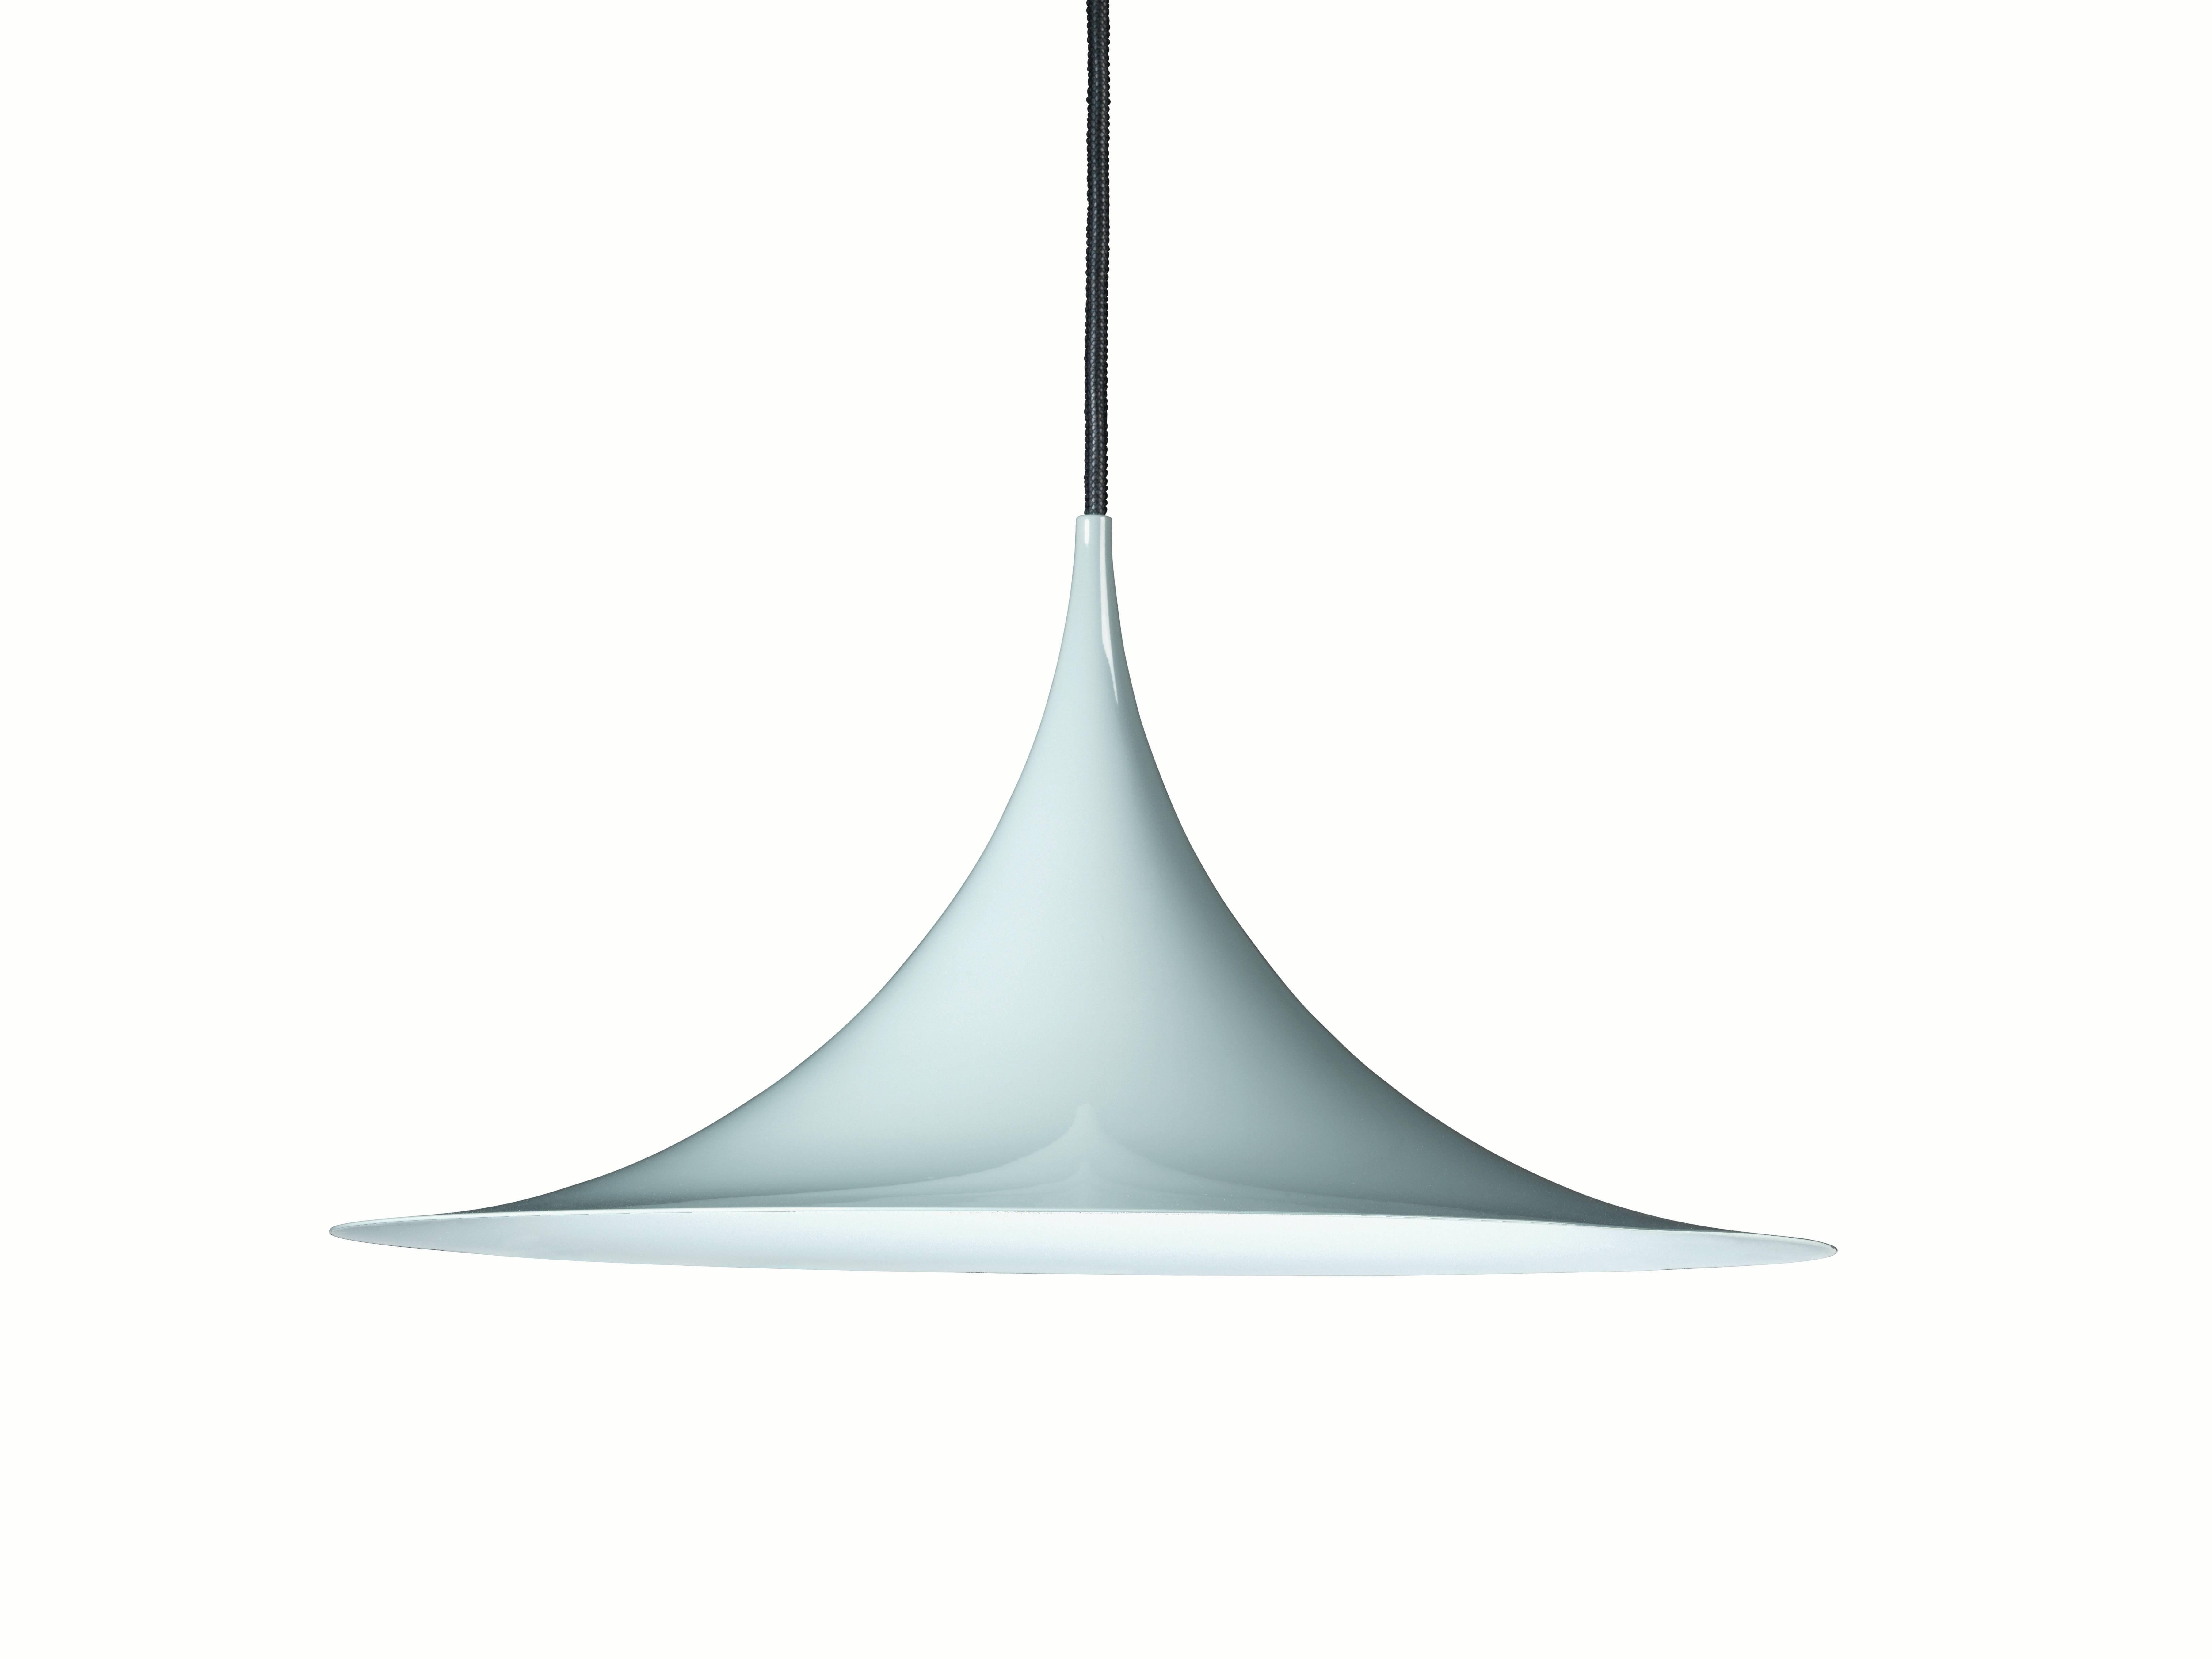 Large Bonderup & Thorup 'Semi' Pendant in White In New Condition For Sale In Glendale, CA